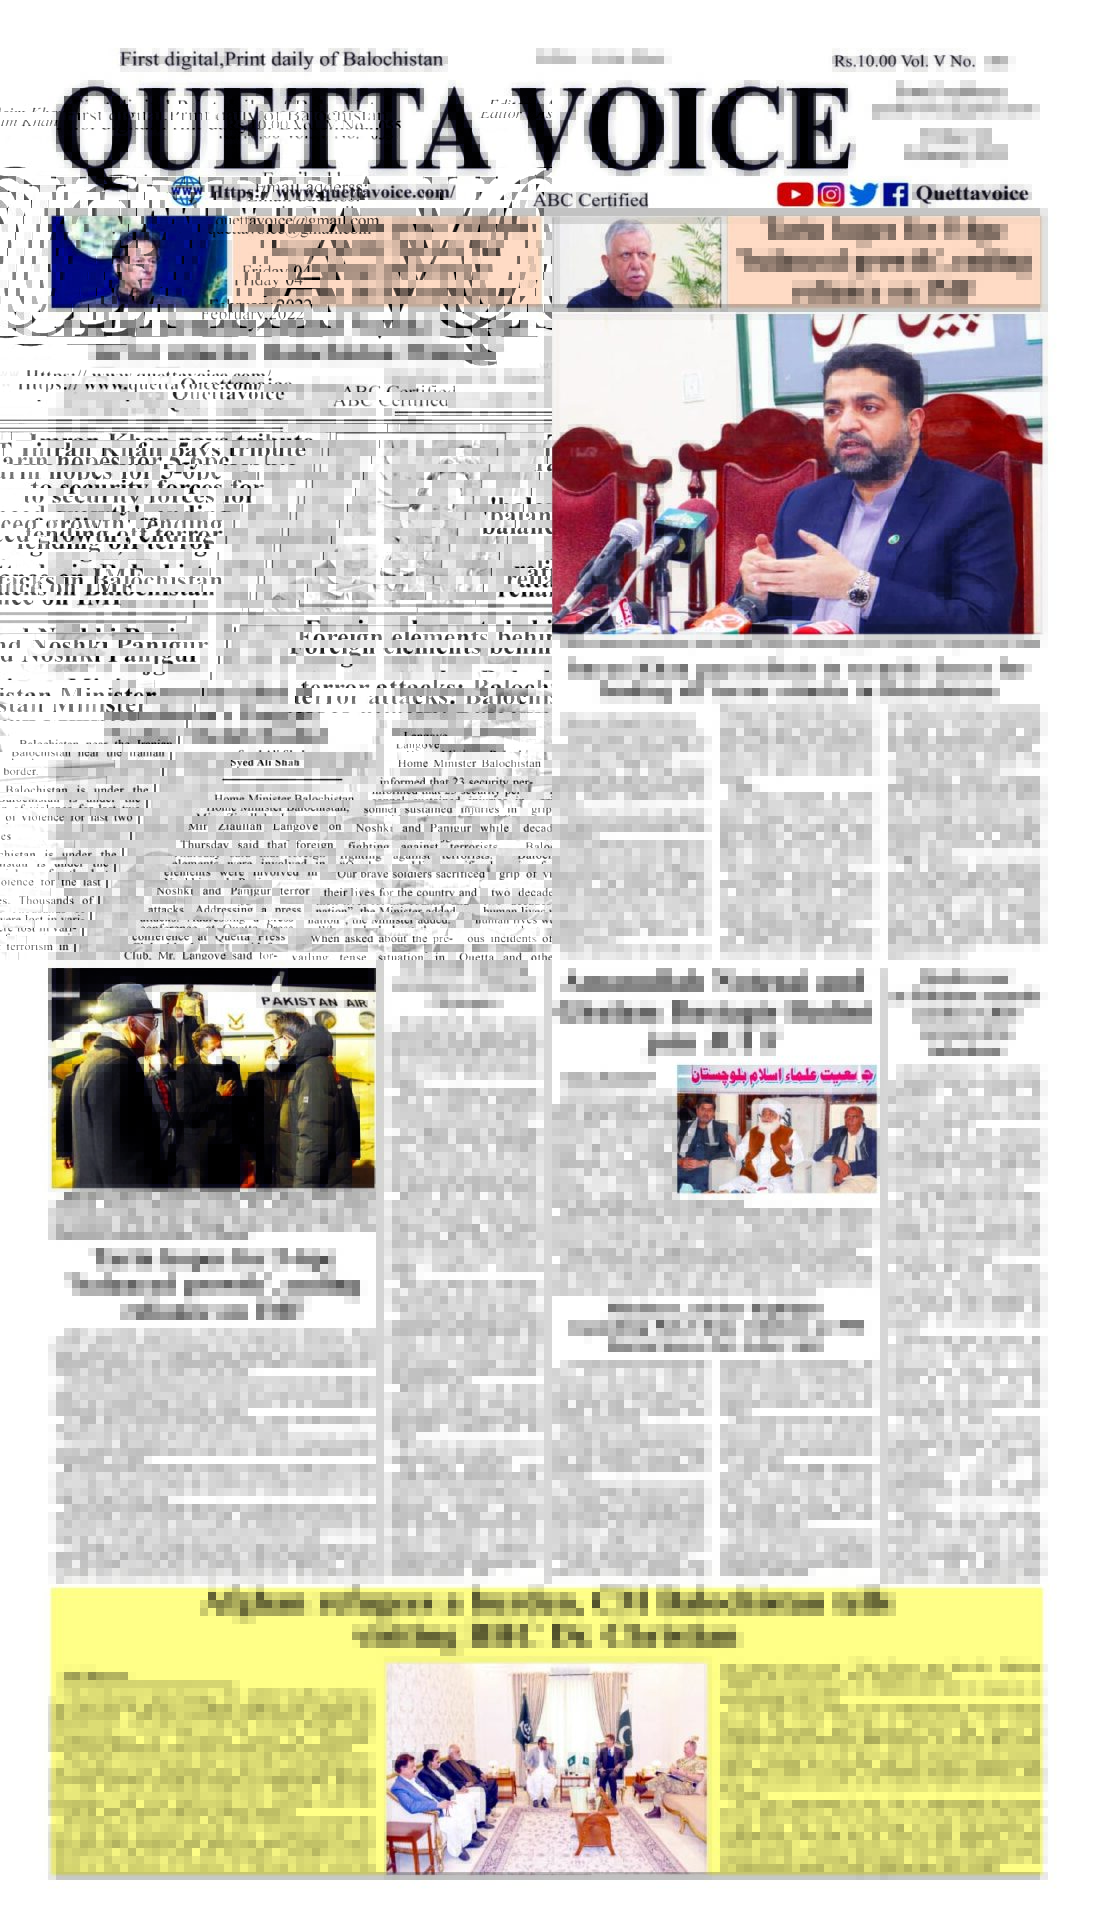 Today's Quetta Voice Newspaper, Friday, February 4, 2022